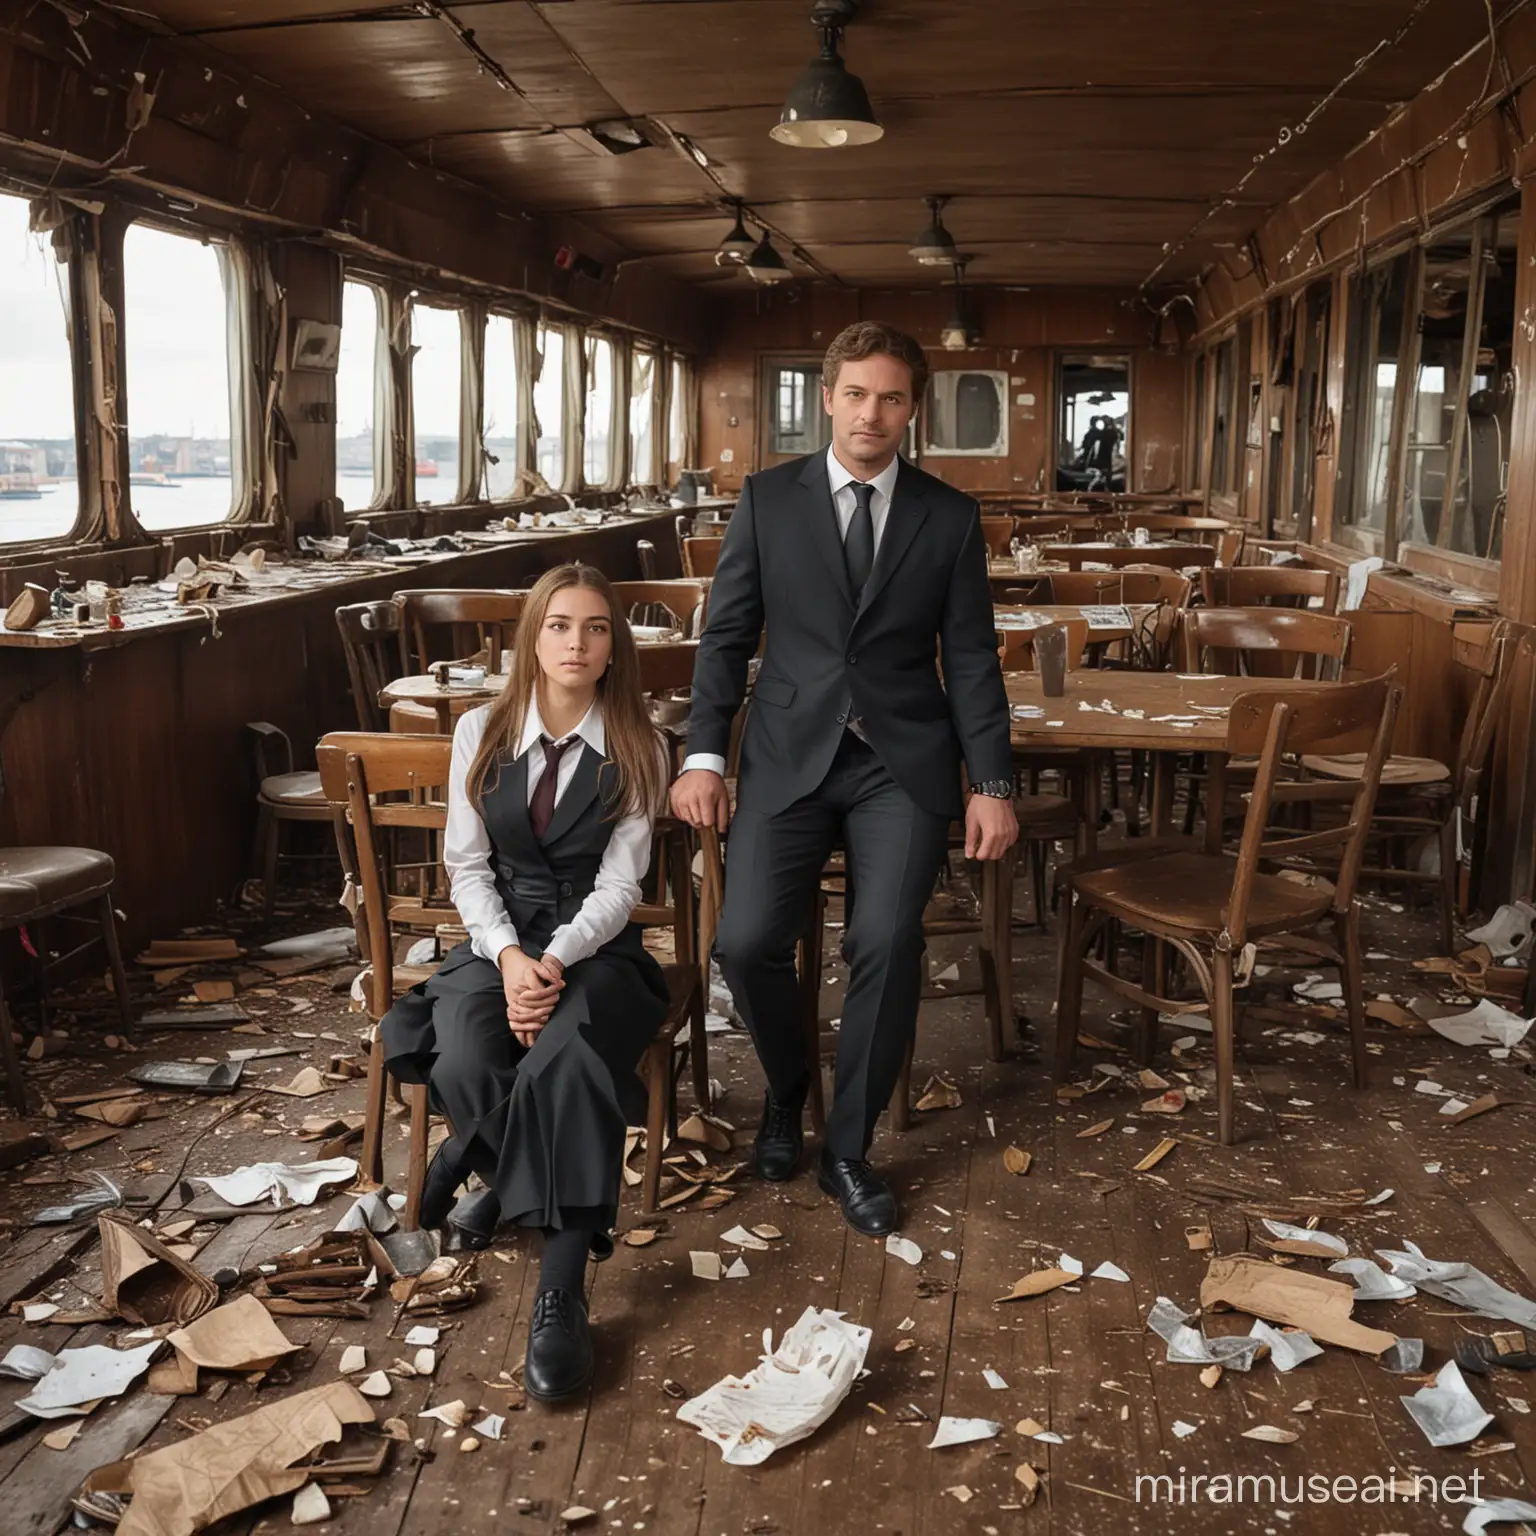 16-years old girl with nutbrown hair, with her hands shackled behind her back, and 40-years old businessman in suit seat opposite one another at a single remaining table with wine glasses inside abandoned ship restaurant, with fallen chairs, kitchenware, pieces of food and trash on the floor around